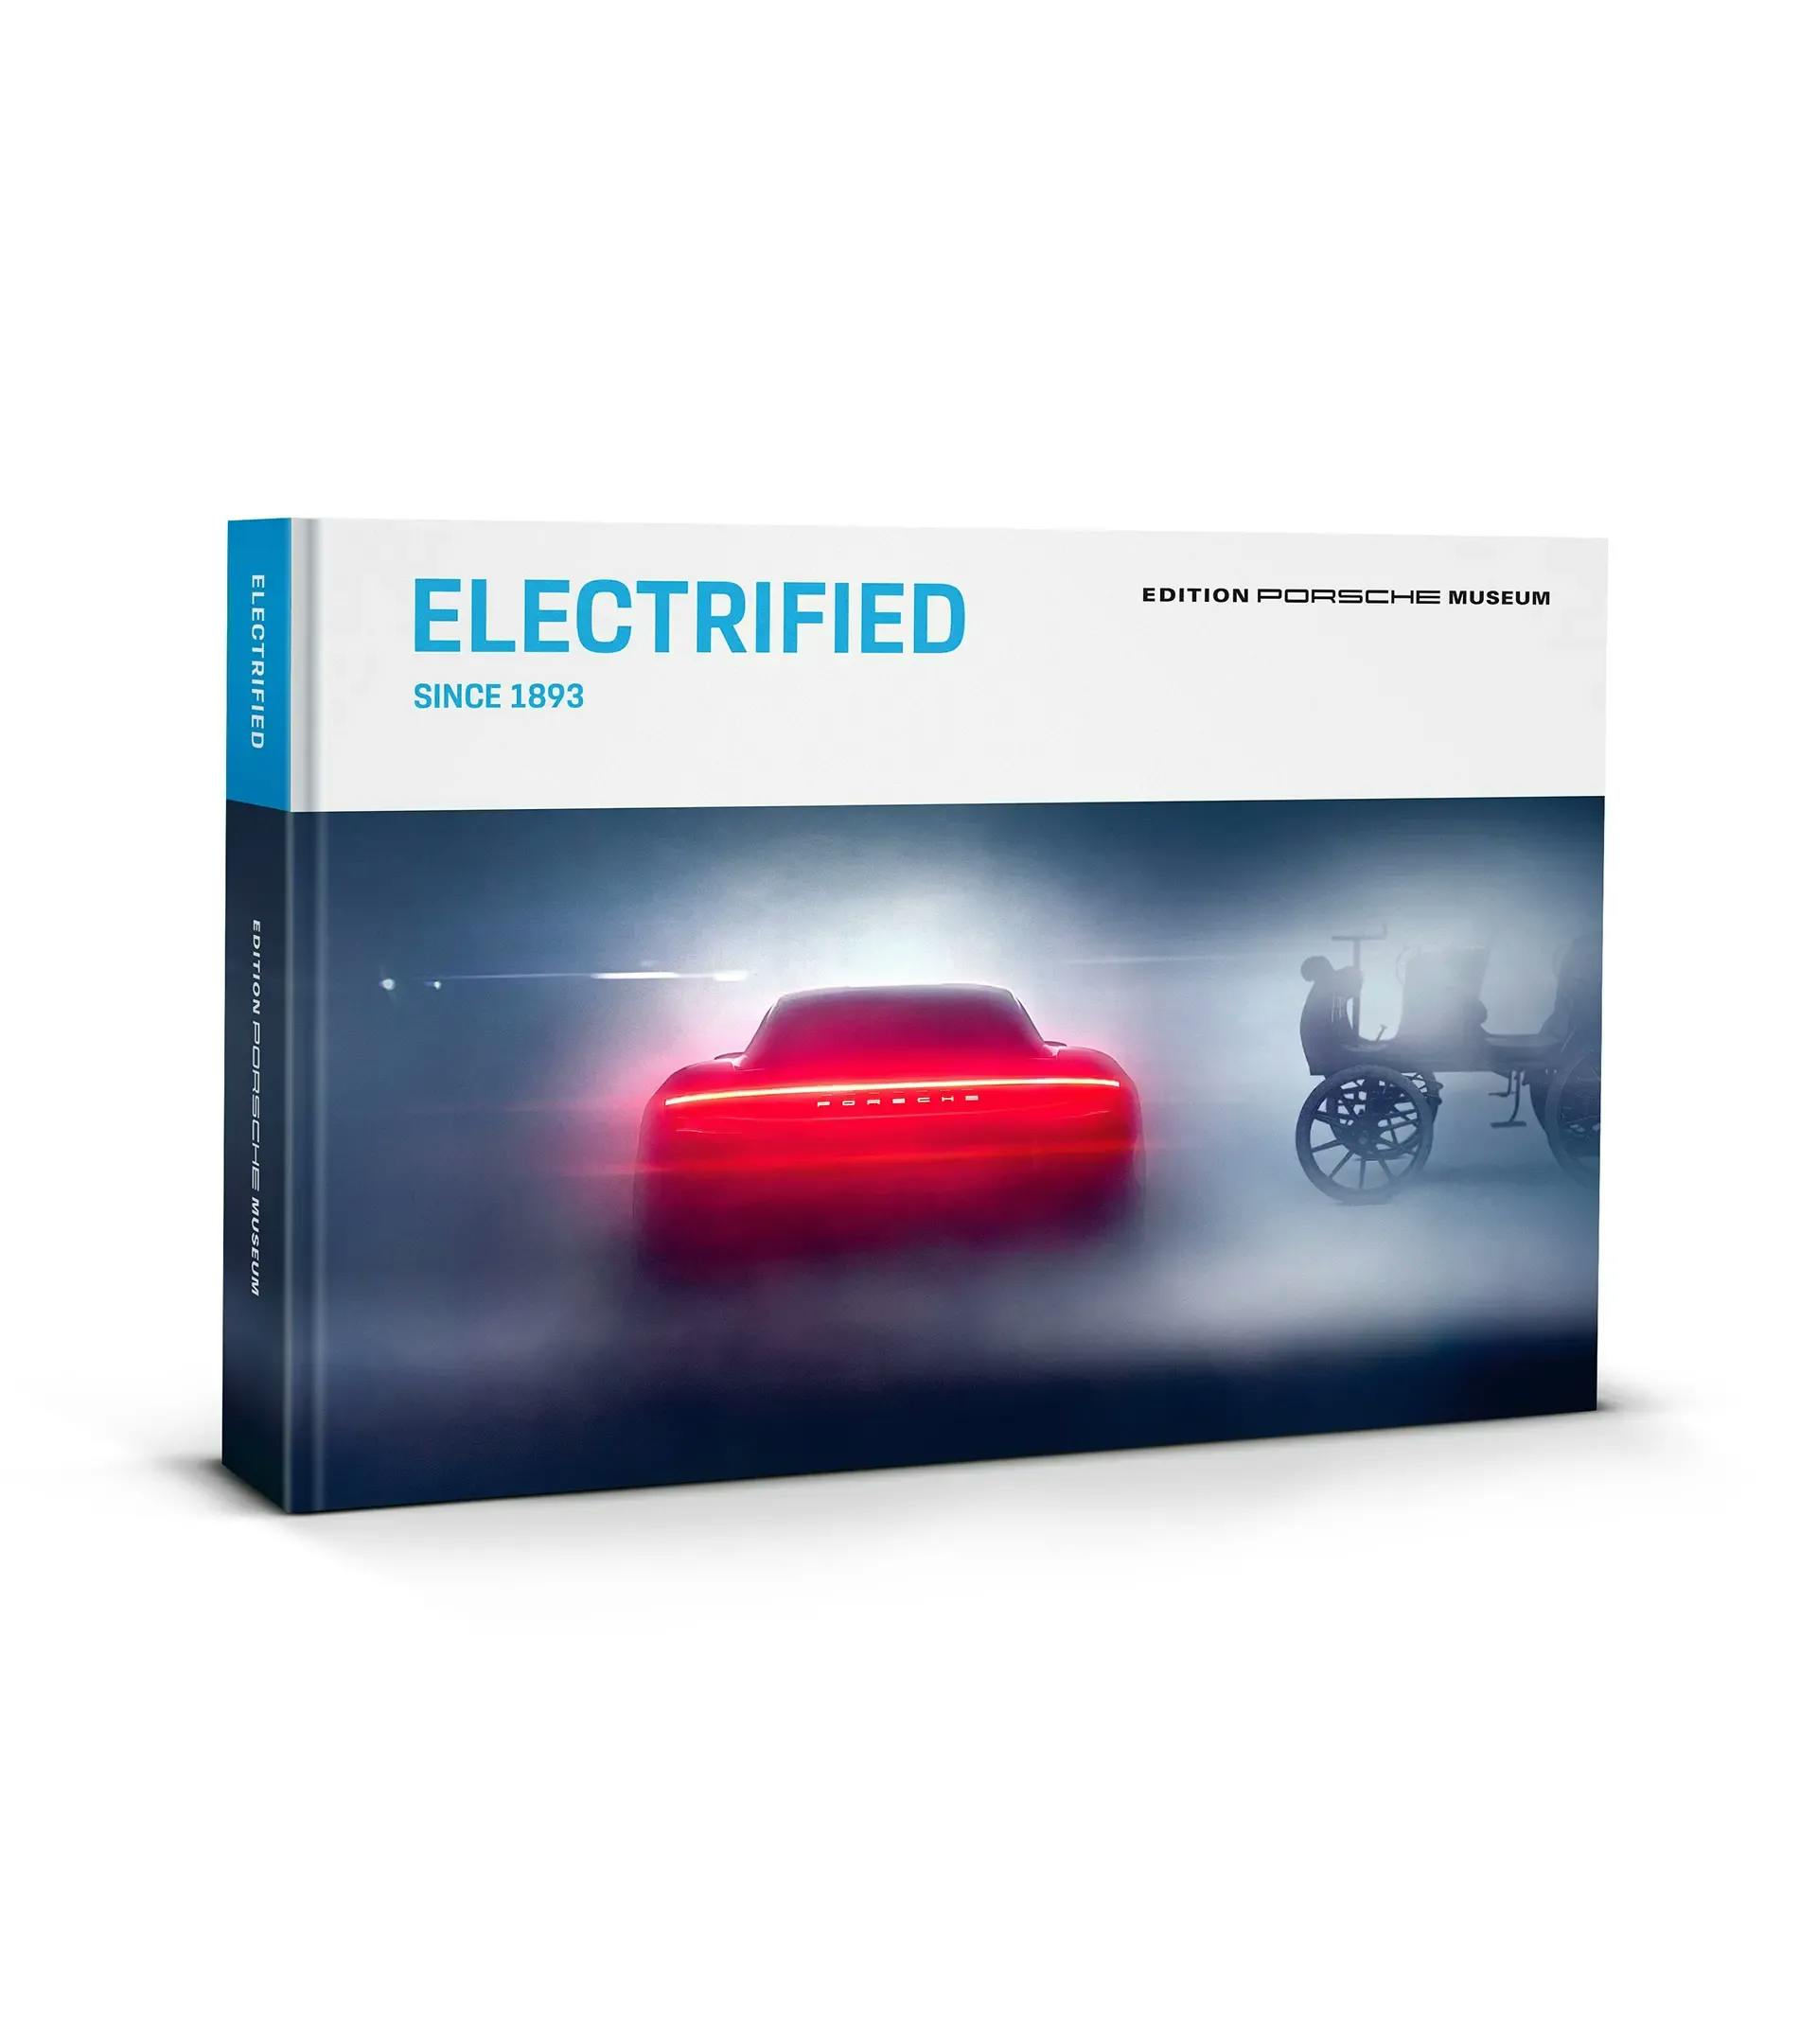 Electrified. Since 1893, book 1